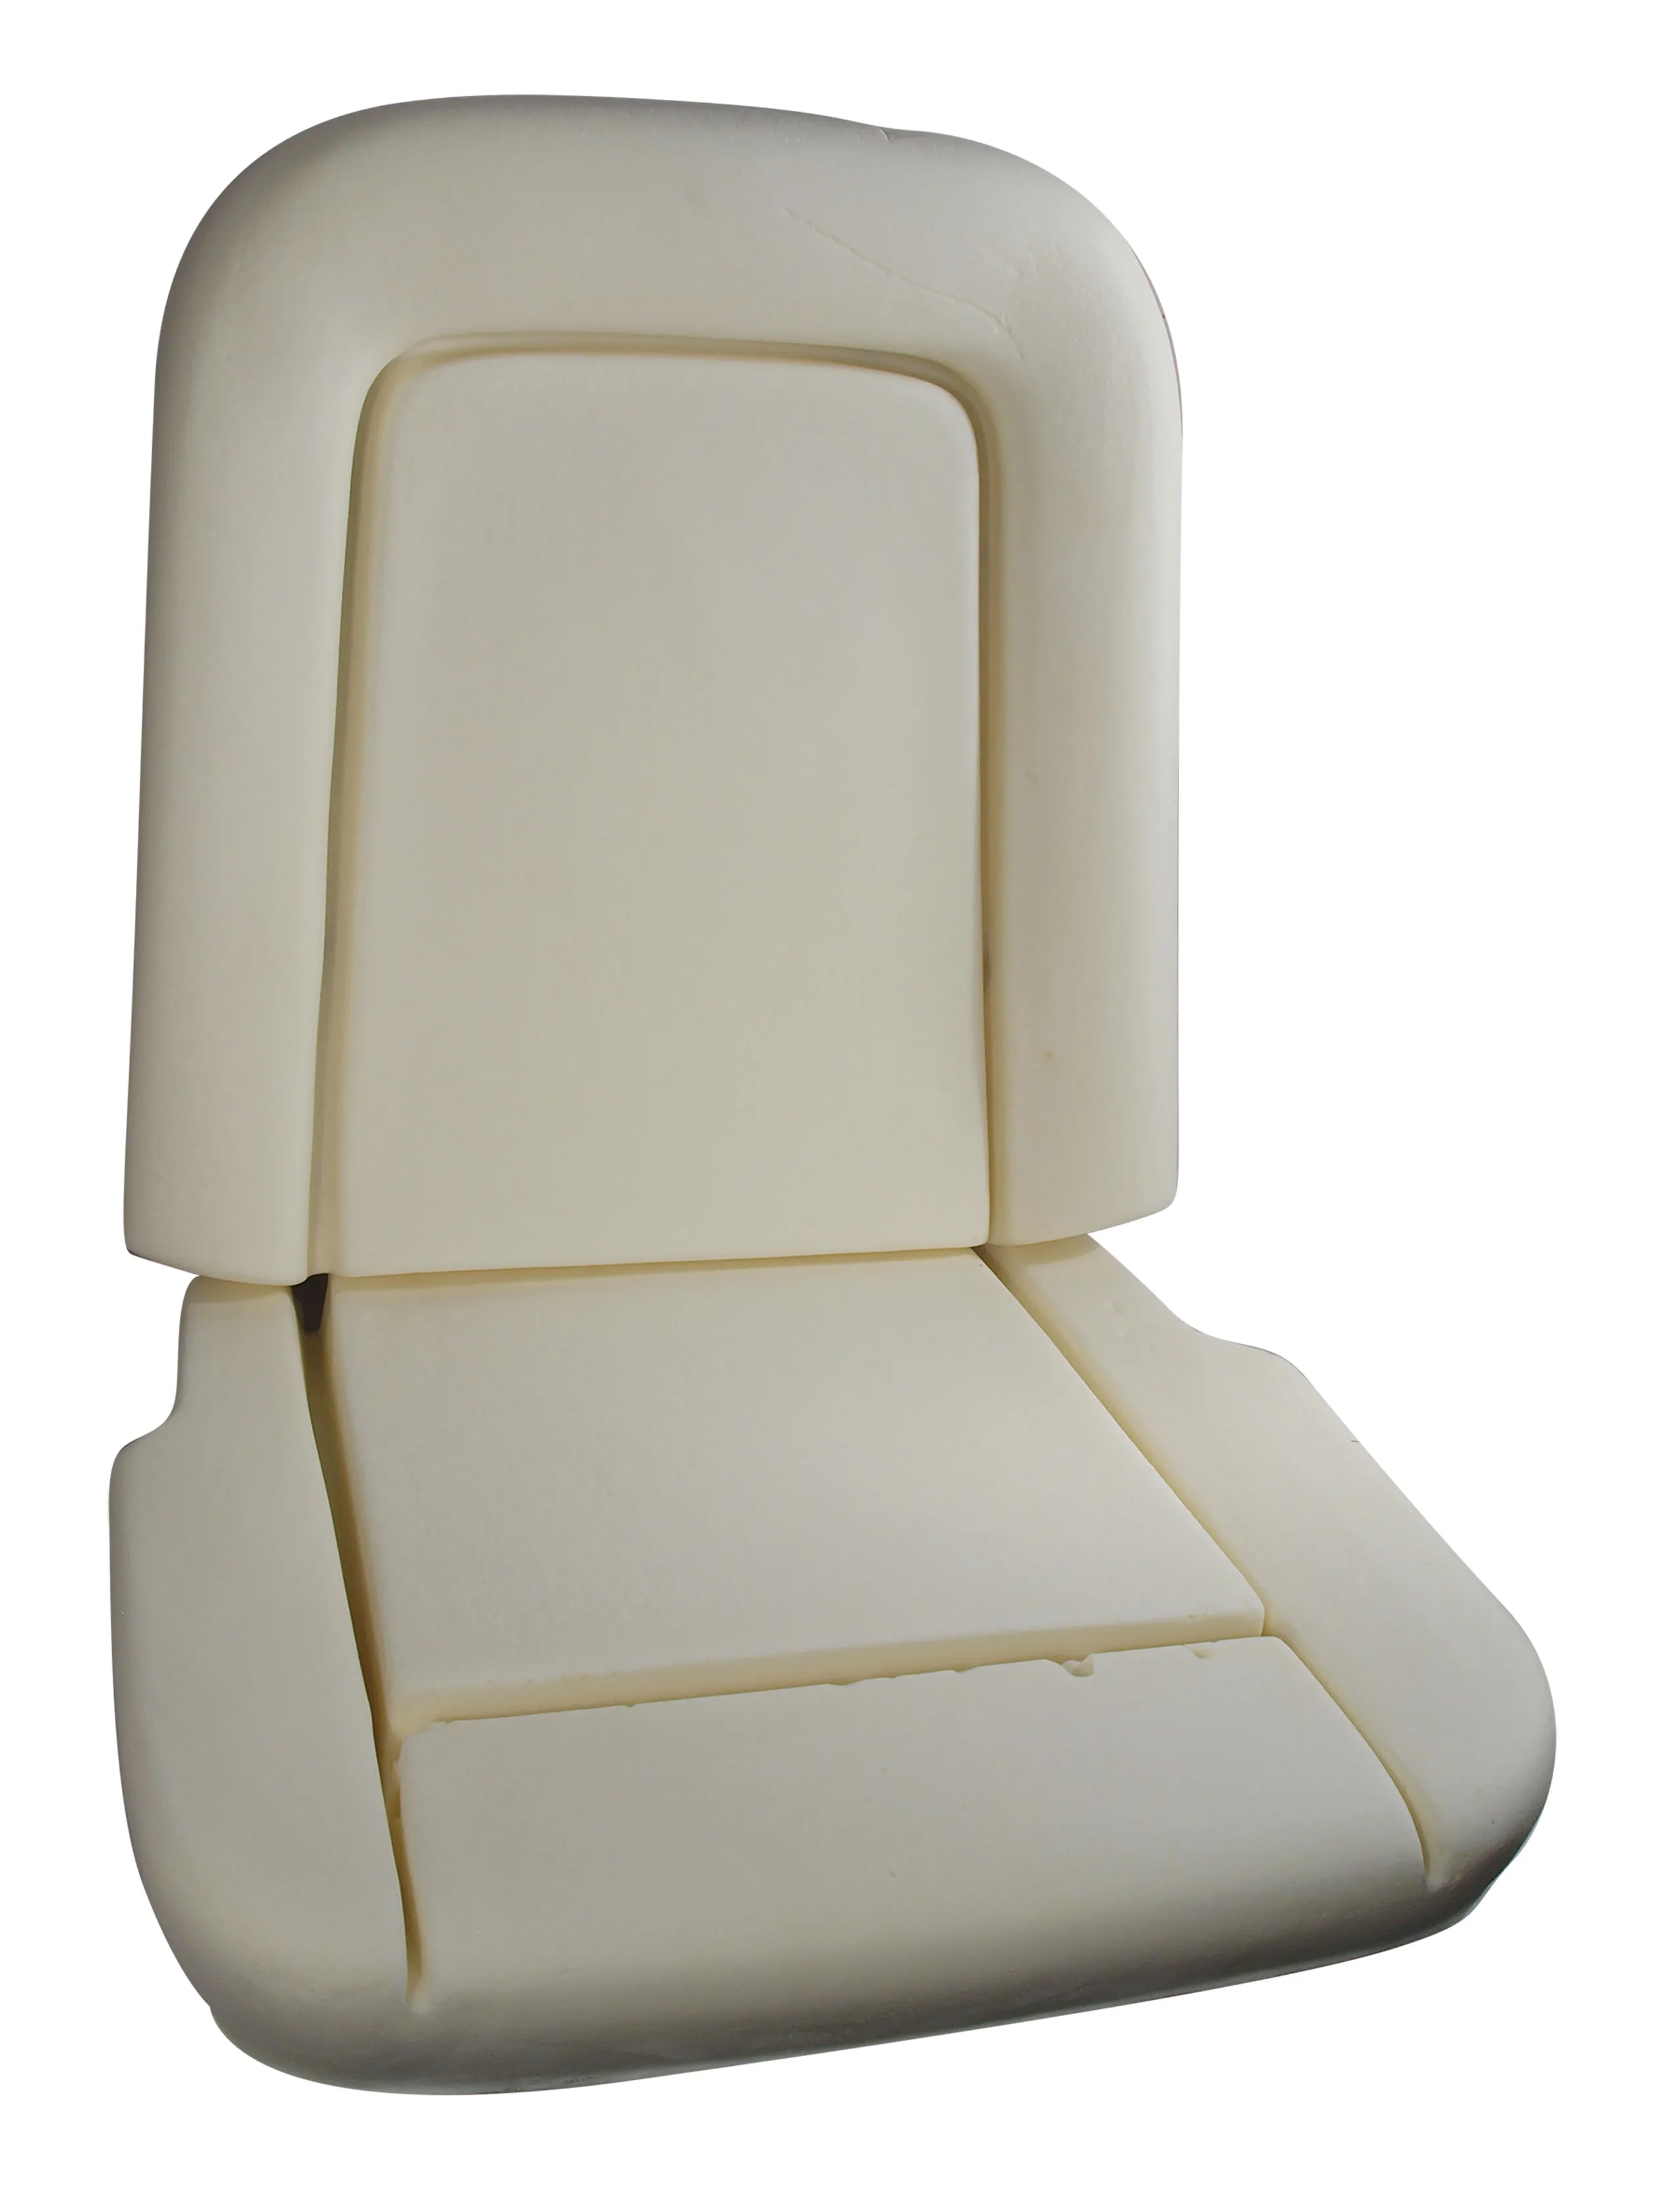 First Generation 1967 Ford Mustang Seat Foam - Standard Or Deluxe - 1 Top & 1 Bottom - Auto Accessories of America